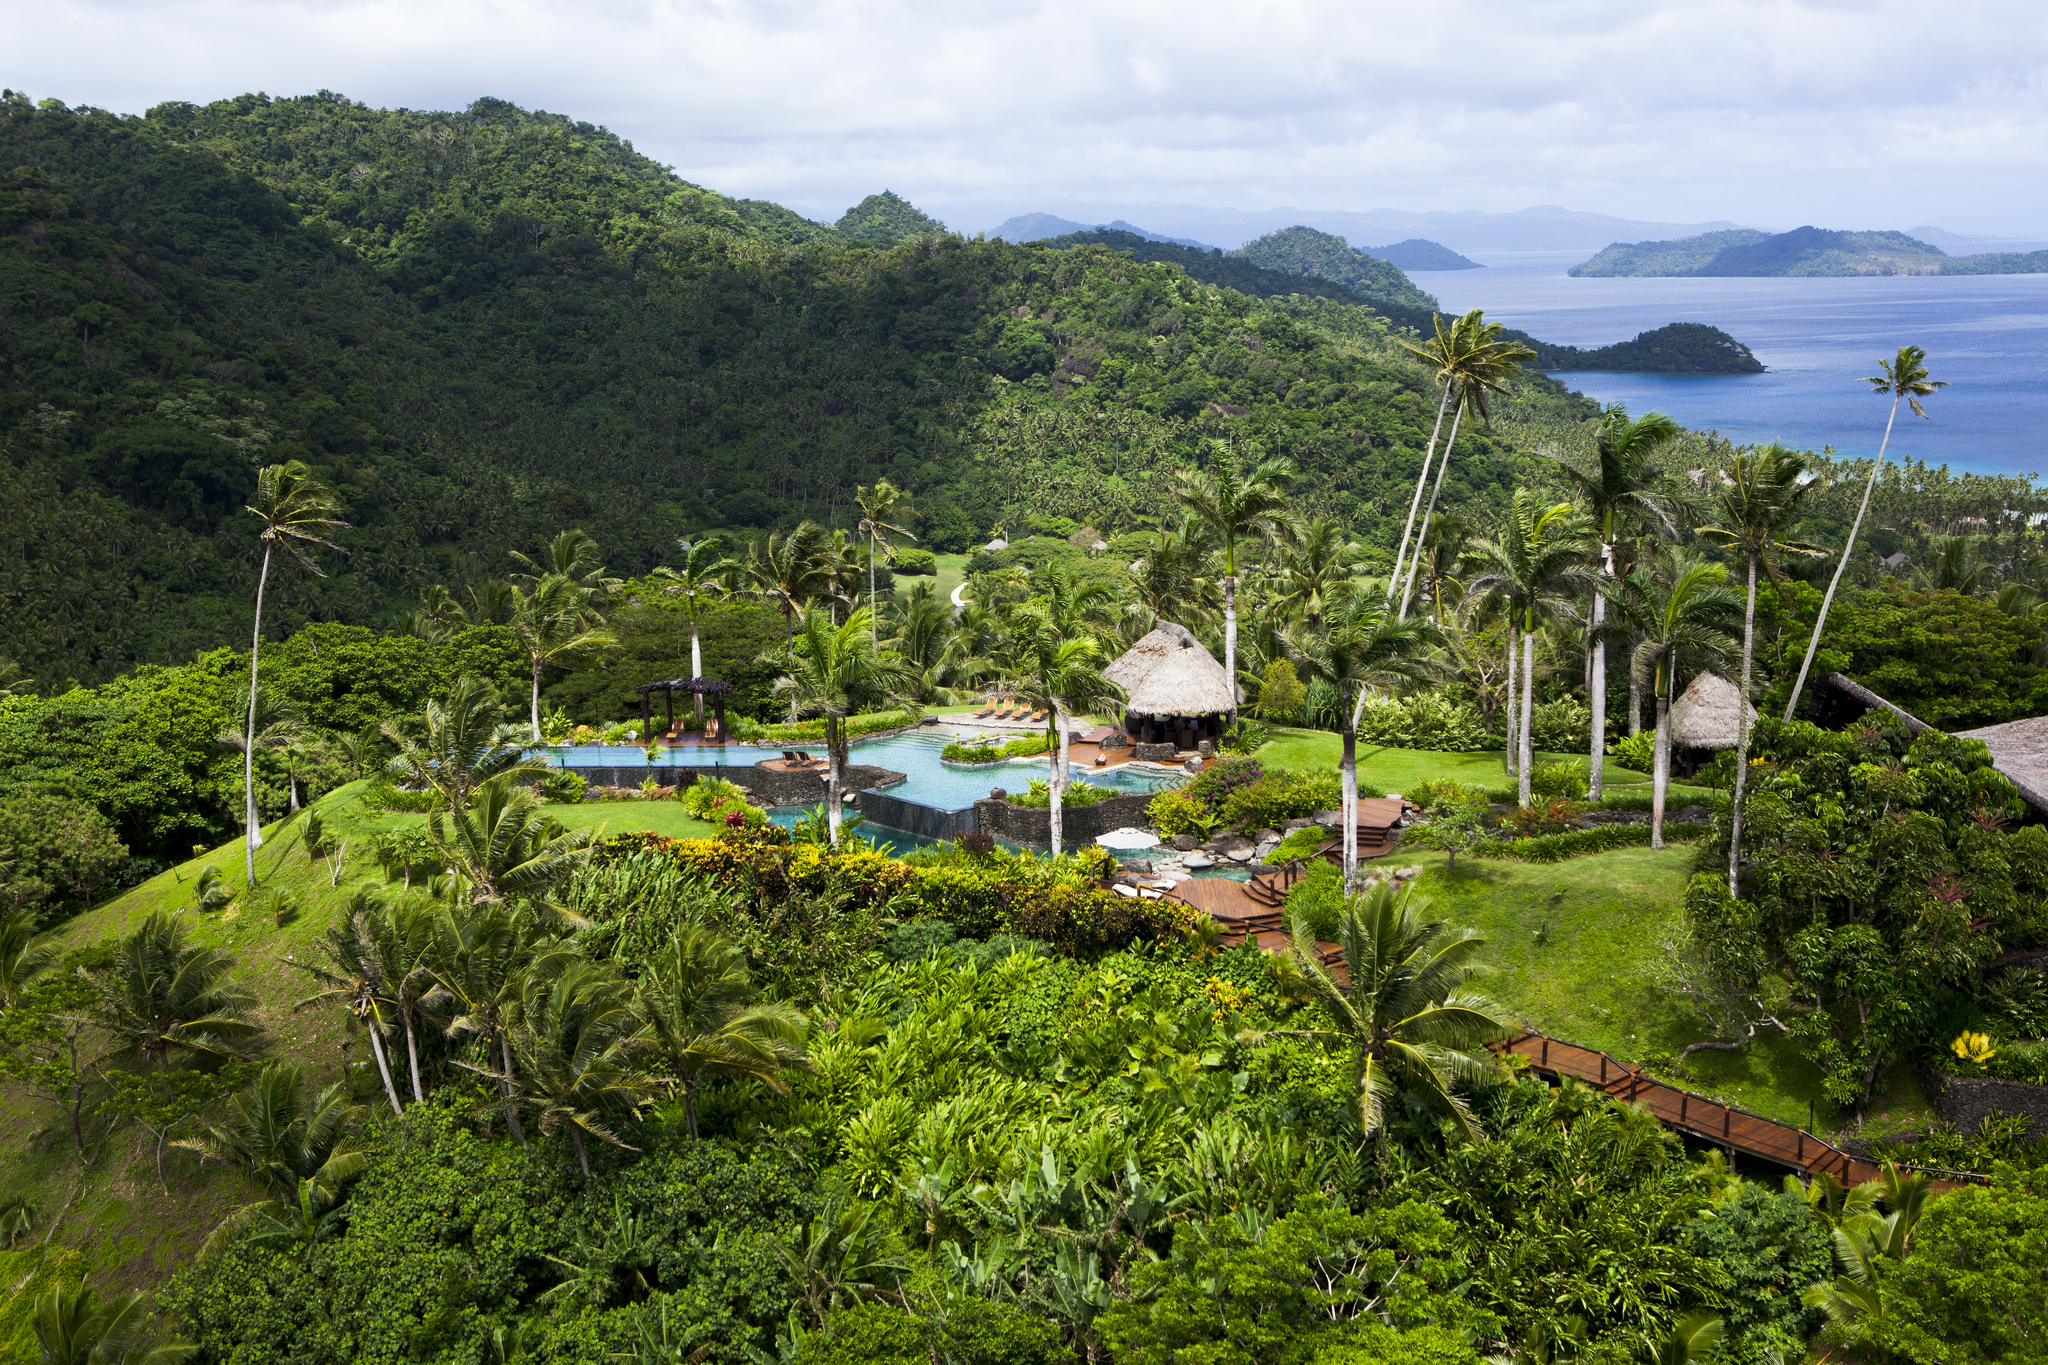 The Hilltop Estate Owner’s Accommodation, Laucala Island Resort